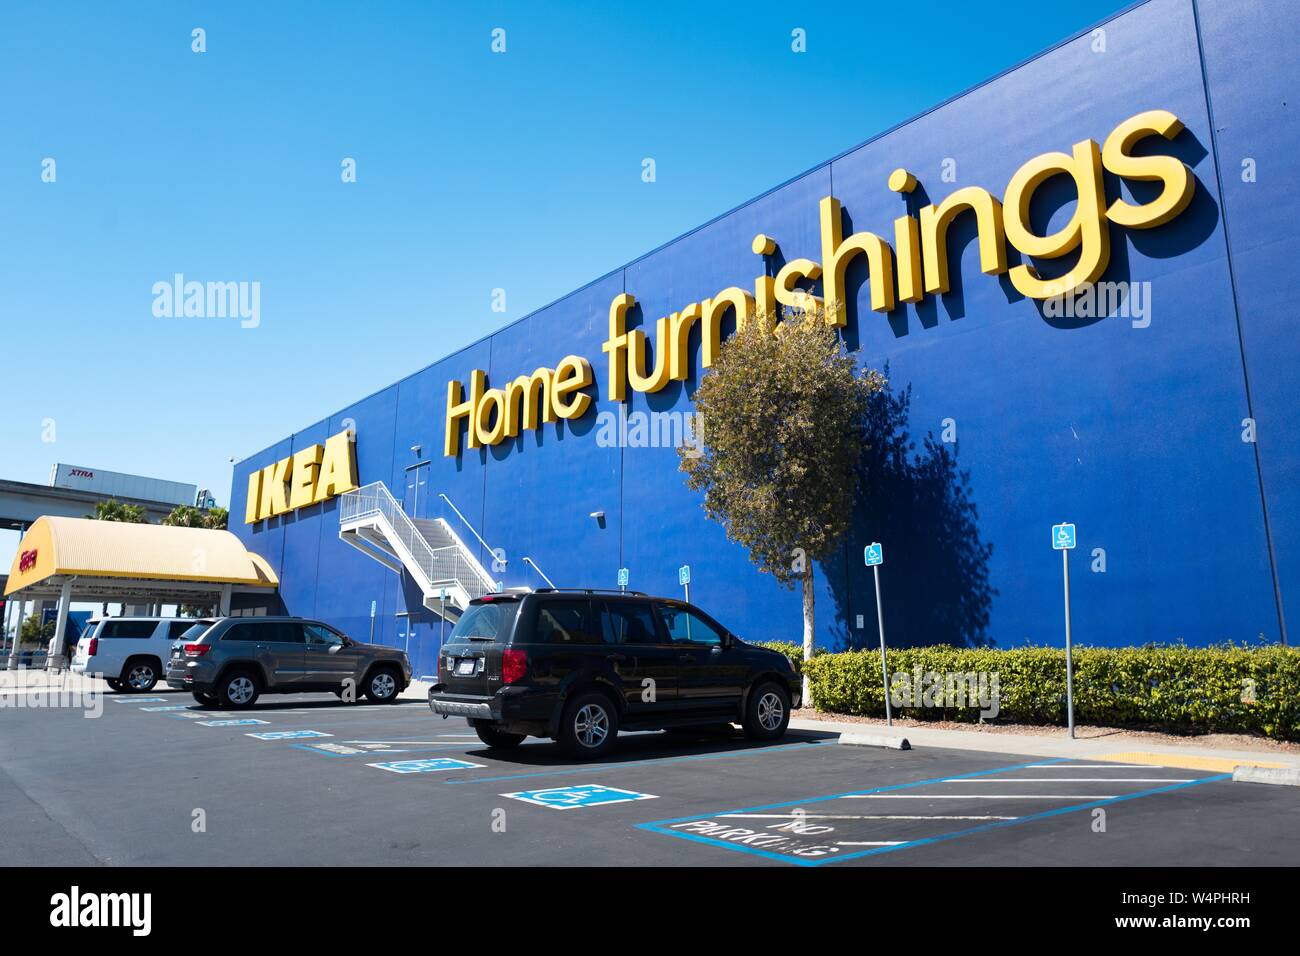 Facade with logo visible at the IKEA Home Furnishings store in downtown Emeryville, California, with cars parked in front, September 18, 2018. () Stock Photo